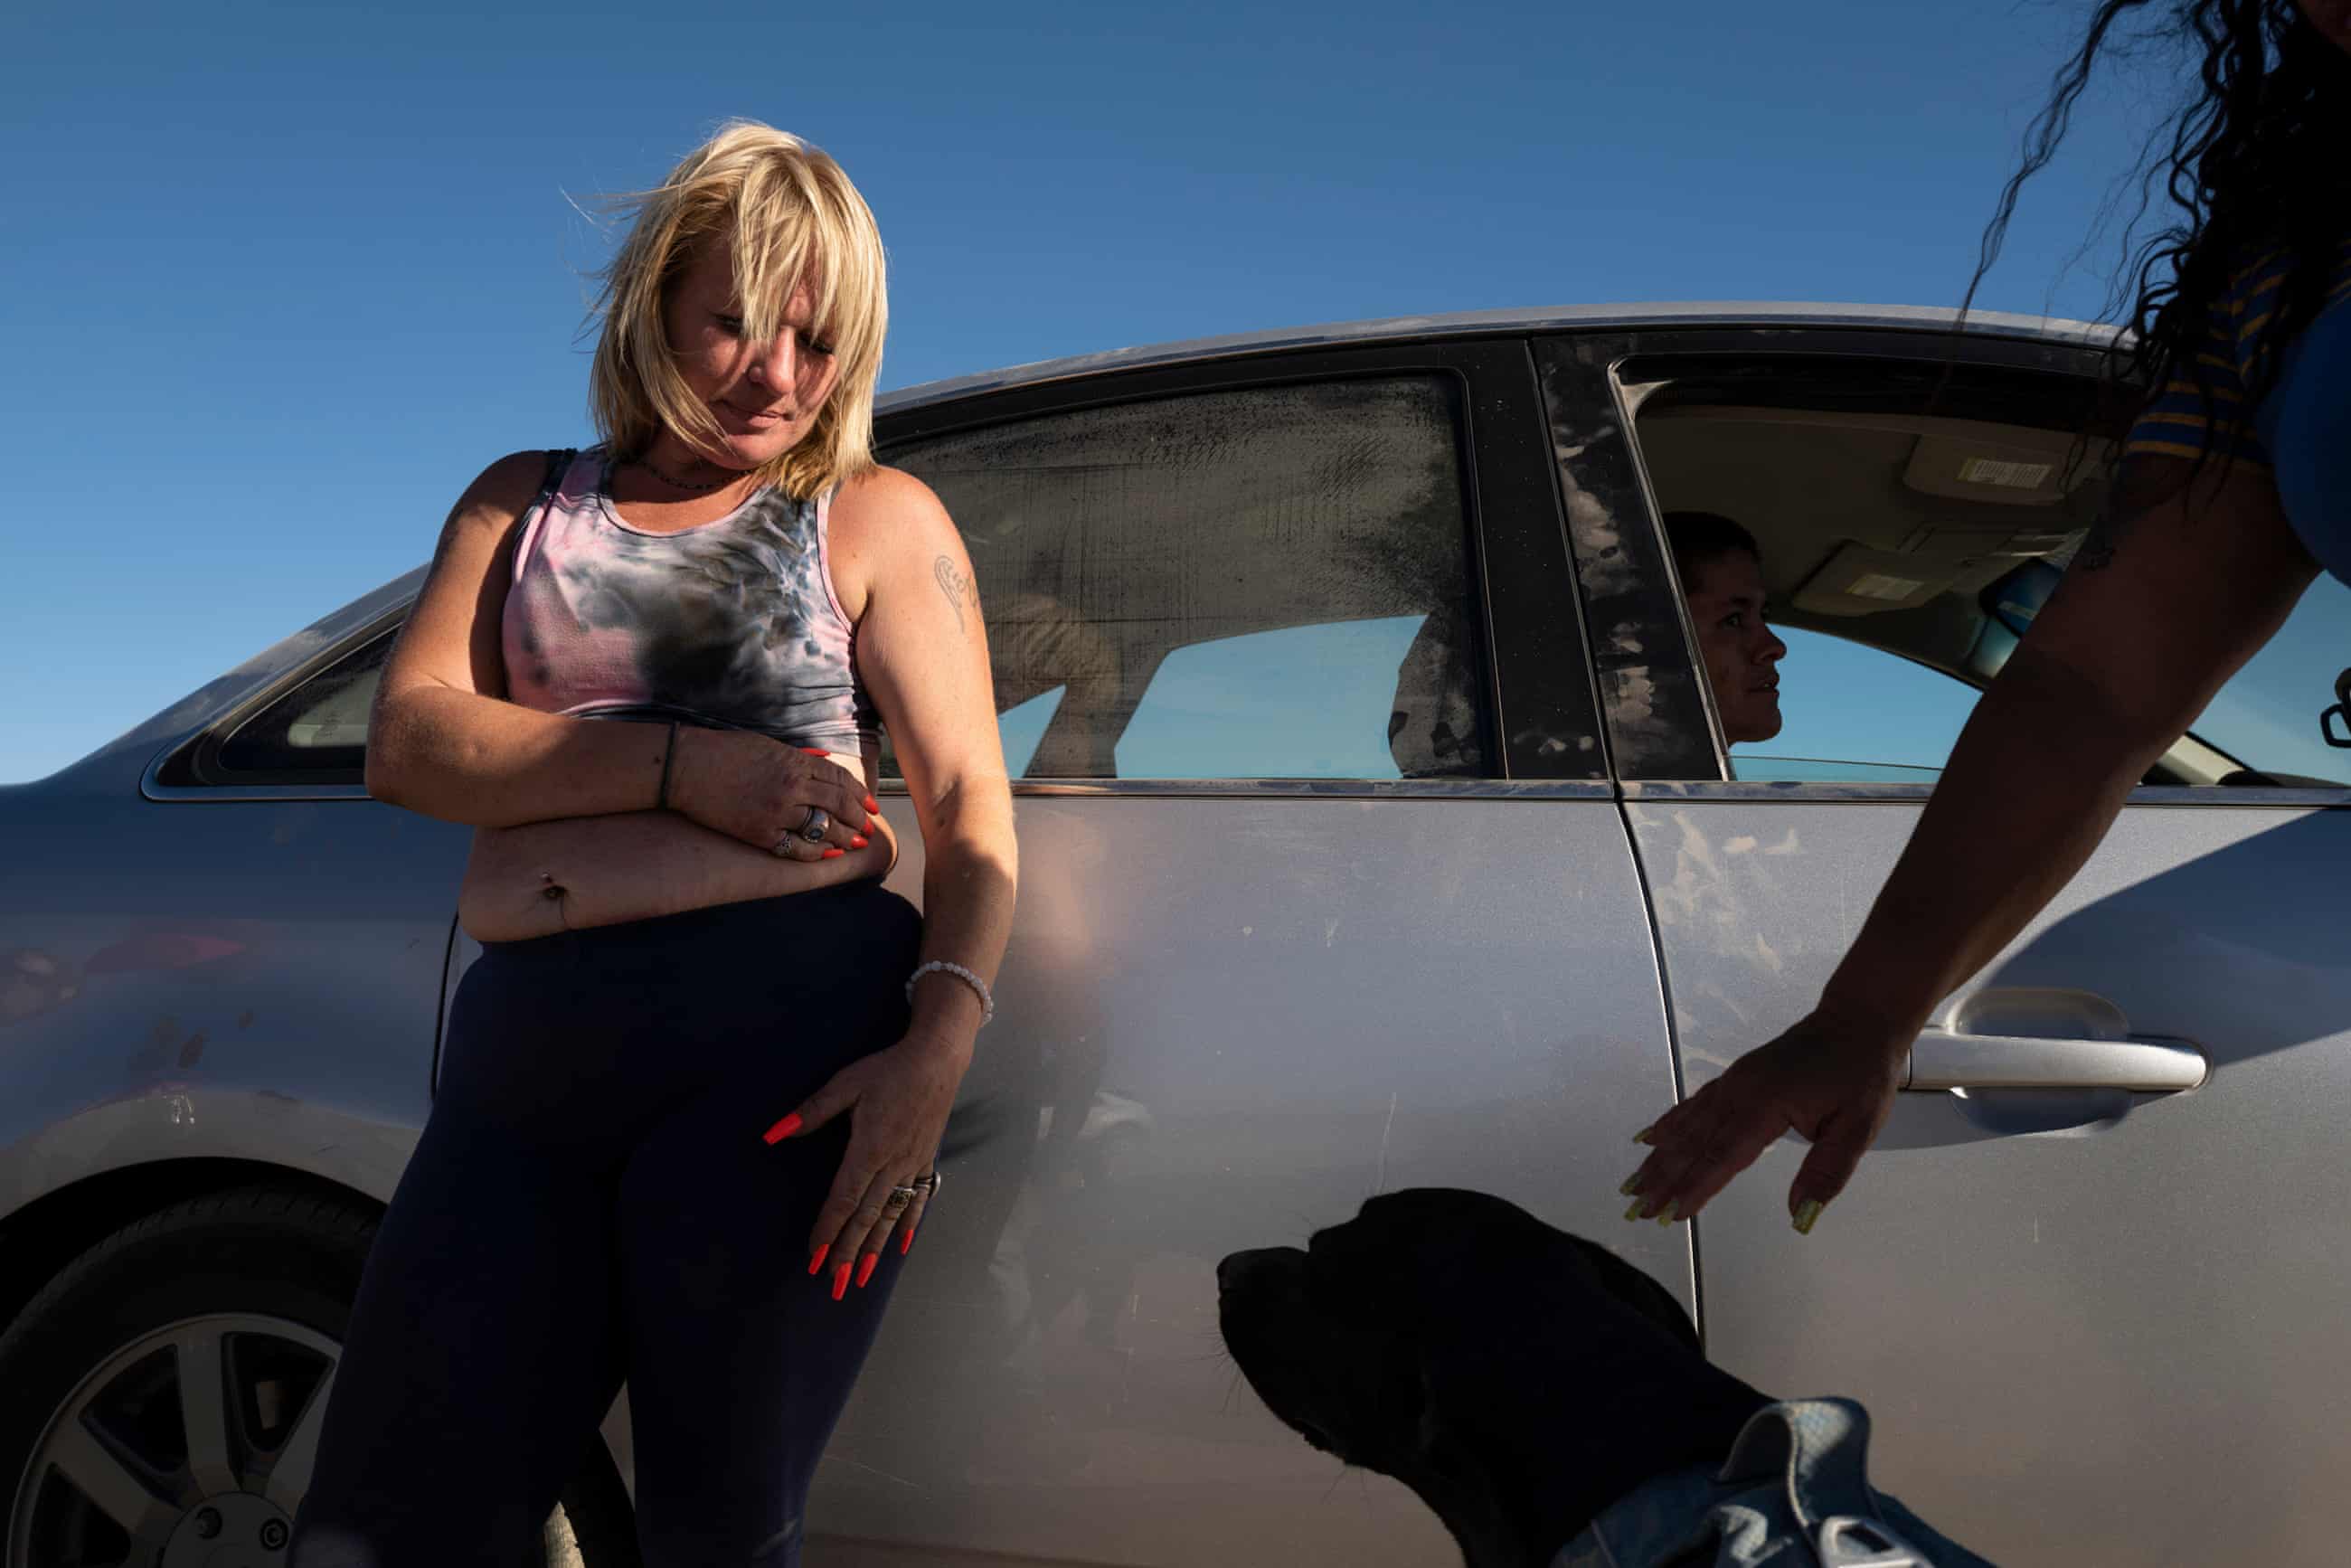 As LA police crack down on homelessness, unhoused end up in Mojave desert (theguardian.com)